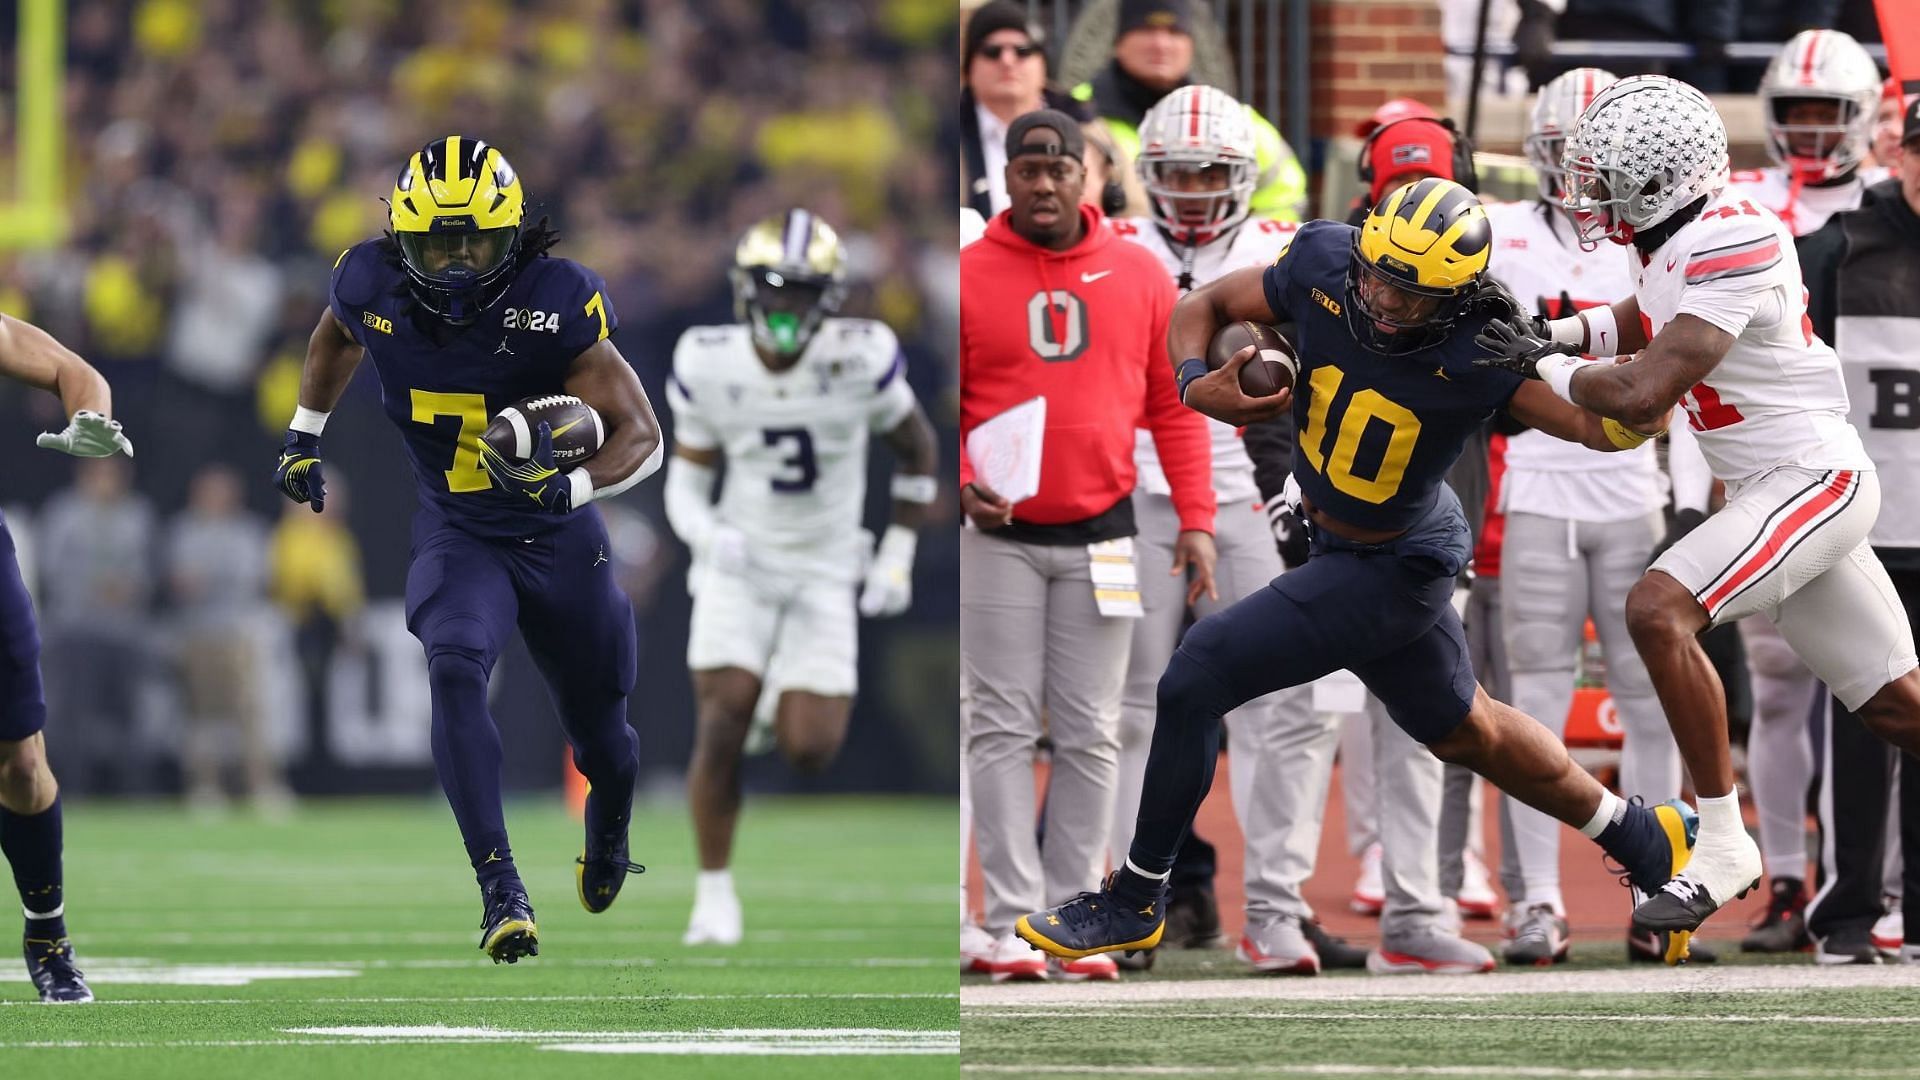 Donovan Edwards and Alex Orji will be two players to watch this season for Michigan